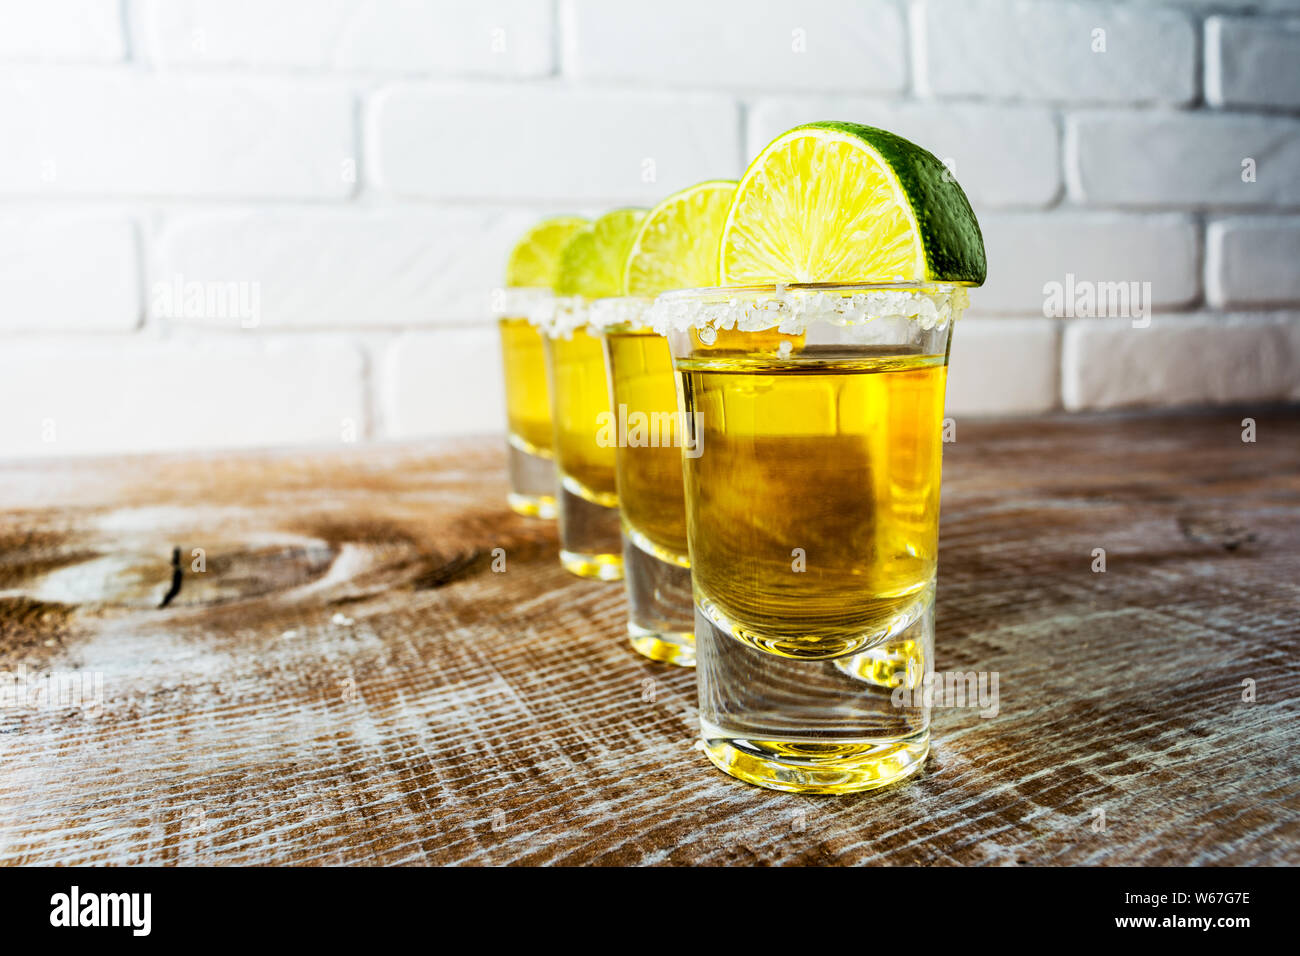 Gold Mexican tequila shots with lime slices on the rustic wooden ...